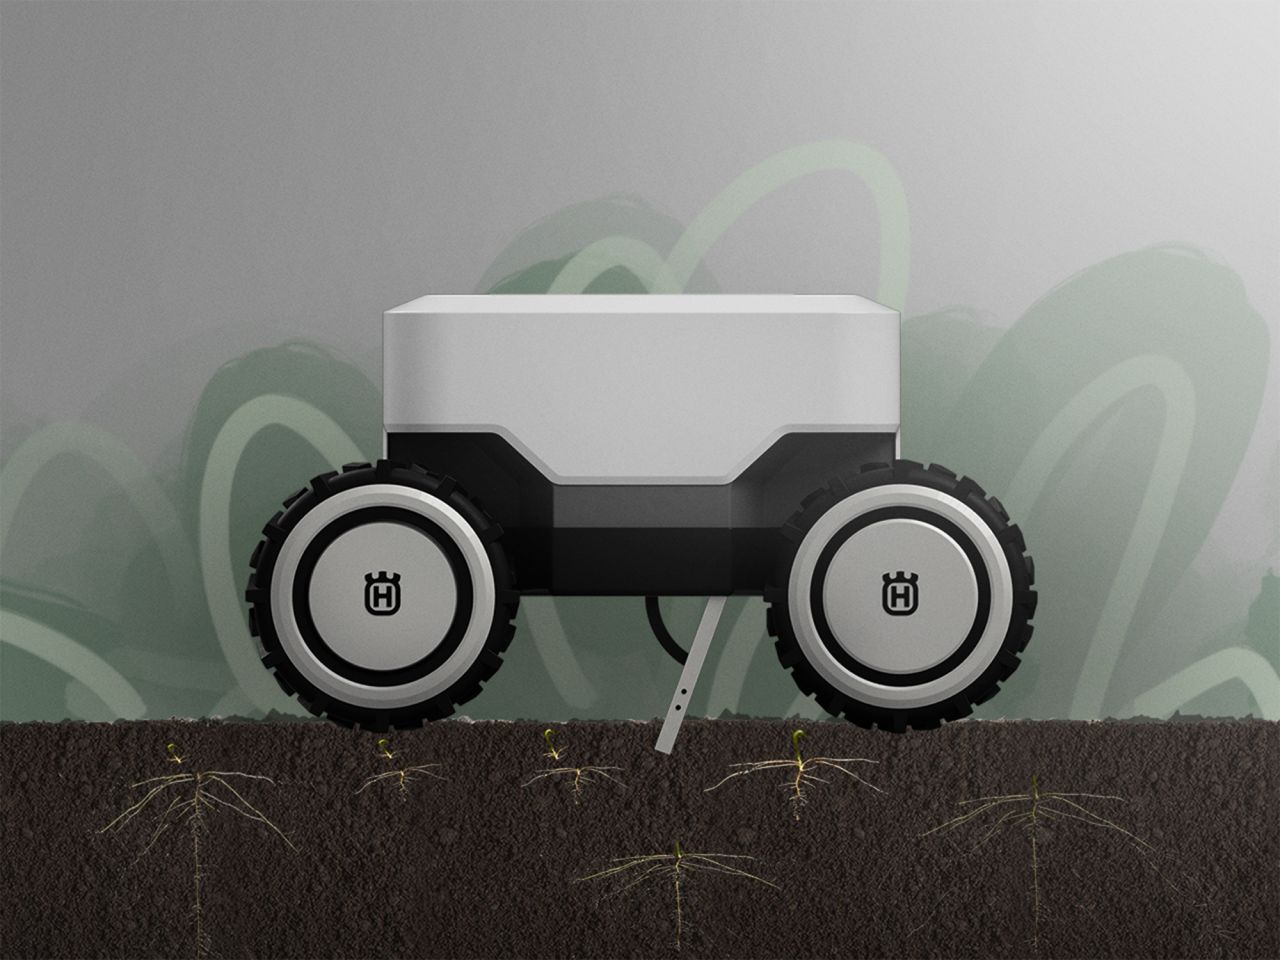 <strong>An autonomous weeding robot for farmers:</strong> "Autoweeder" is a small autonomous weeding robot designed to help small farms run more efficiently. The robot is managed through an app and can navigate through vegetable gardens, allotments, or small fields using GPS. Its inventor is Stina Godée, a student from Lund University in Sweden. 